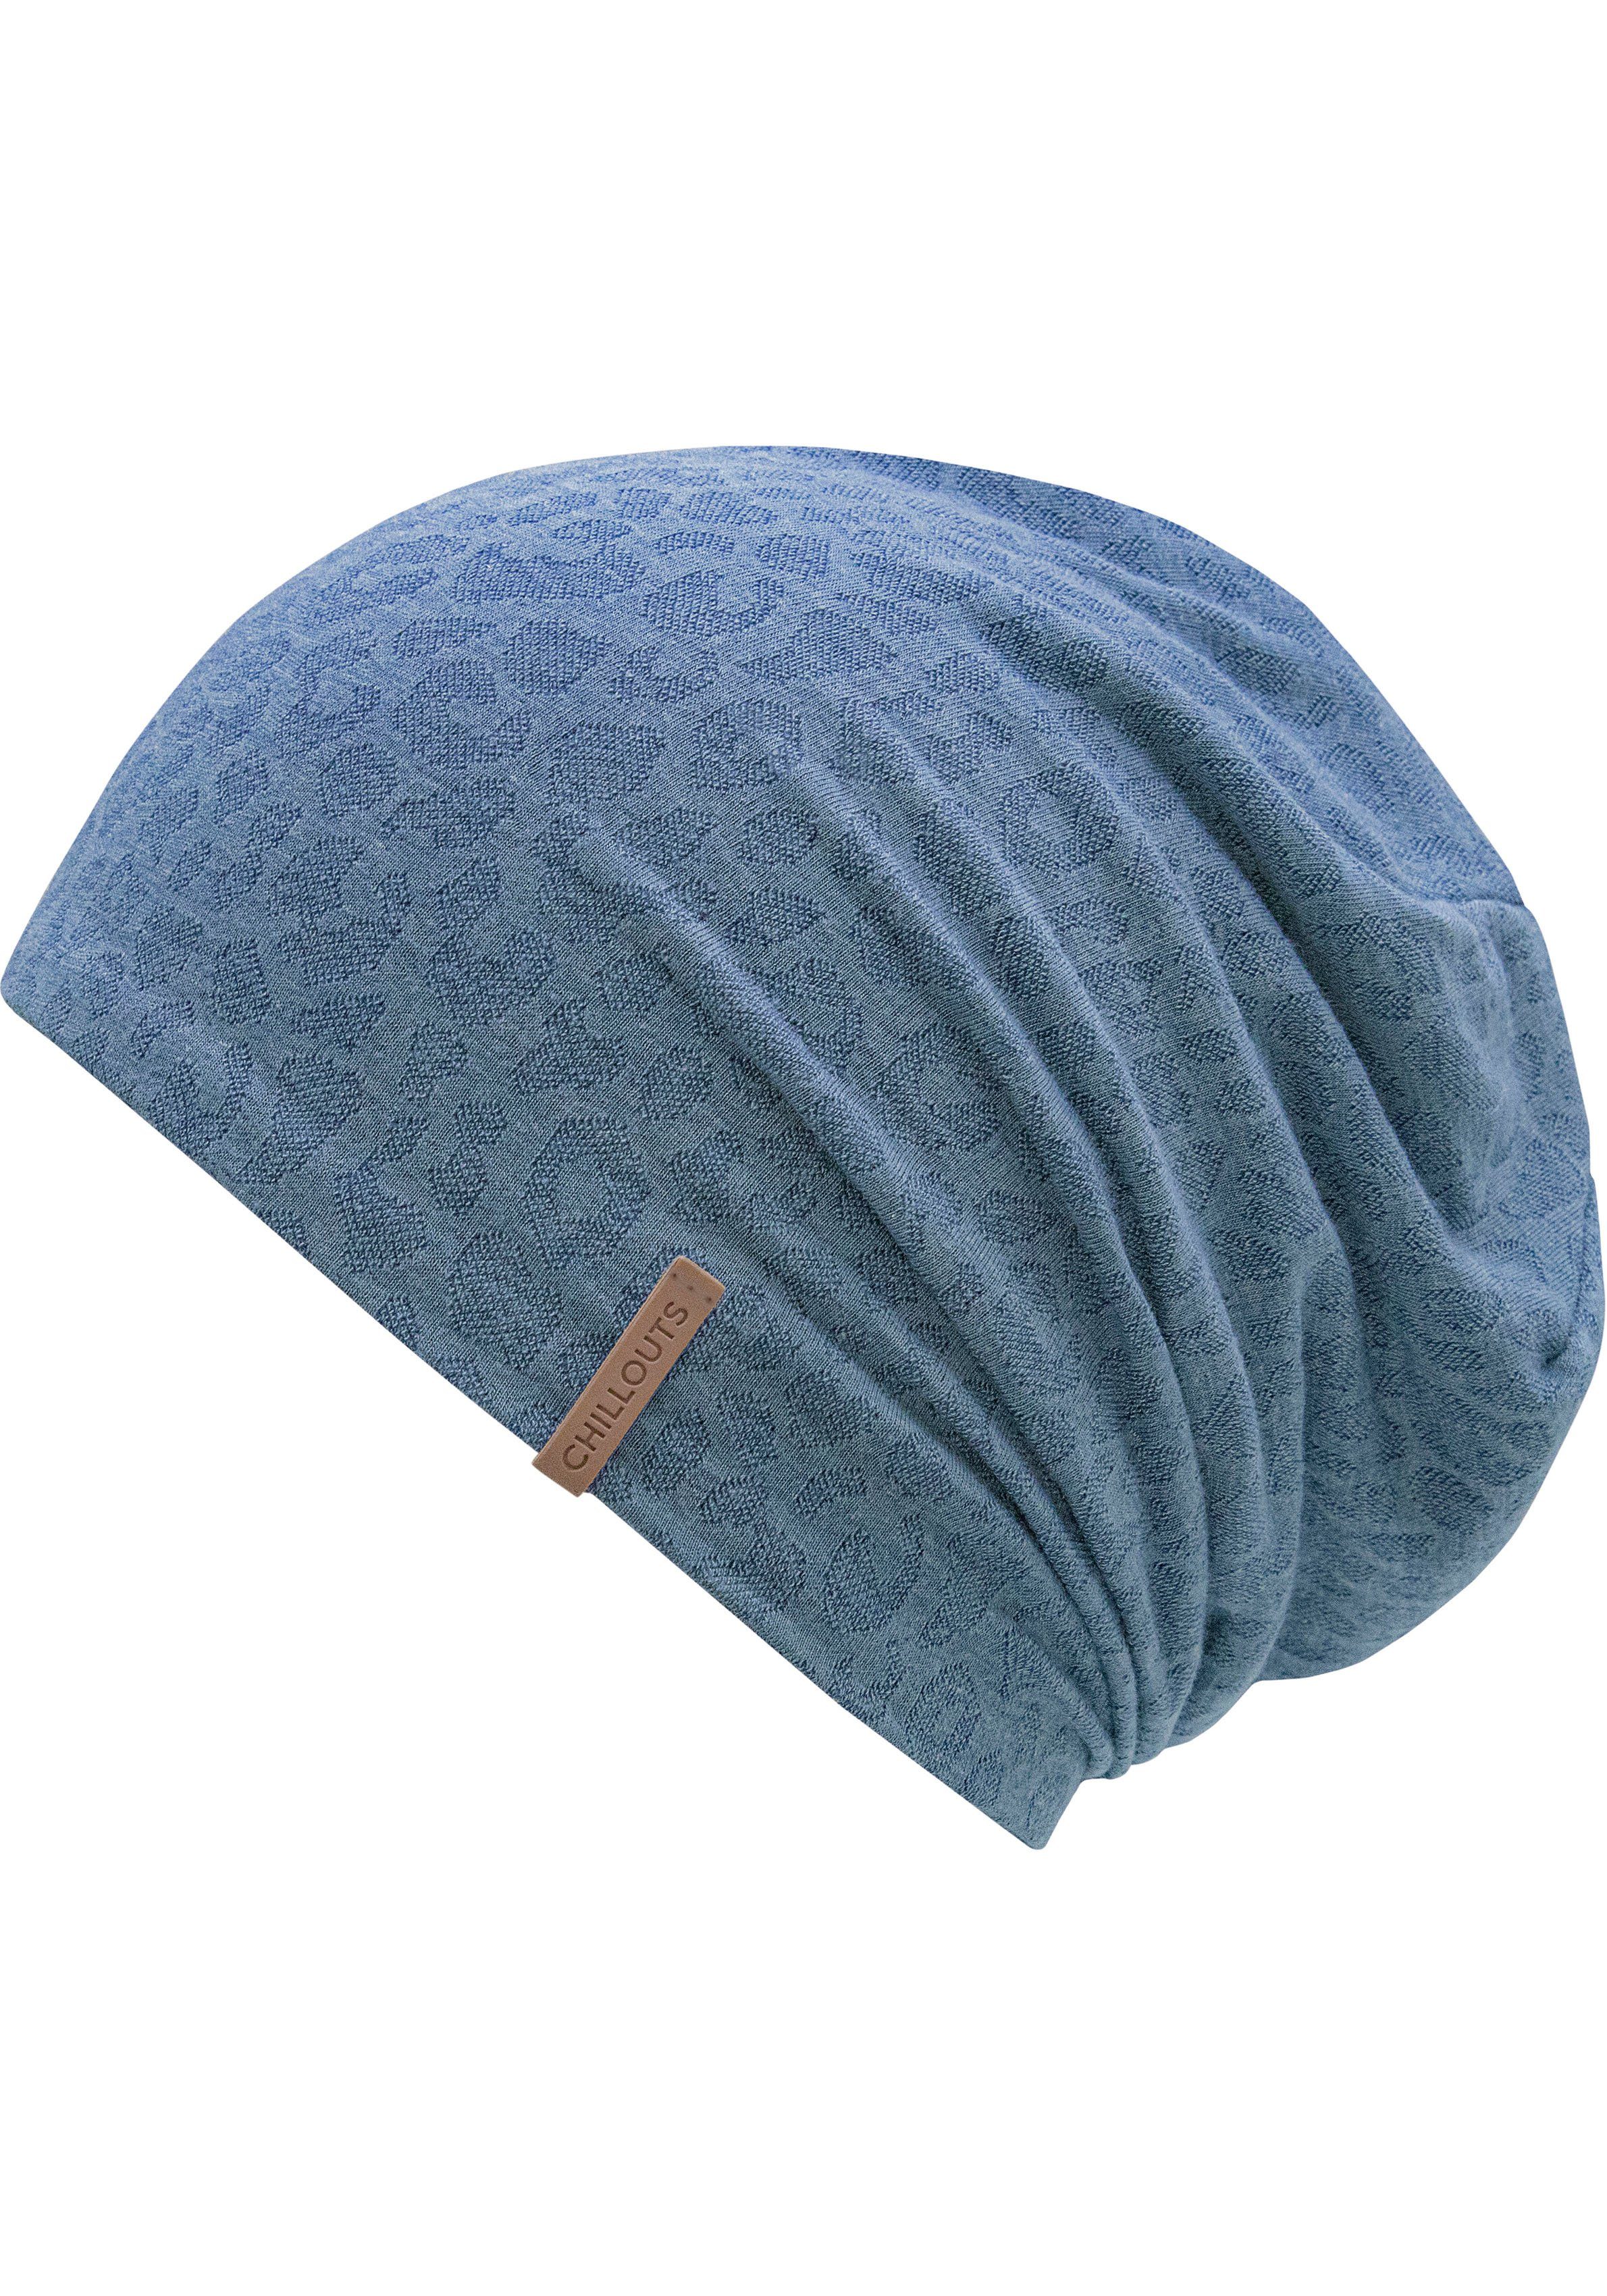 chillouts Beanie Rochester Hat jeans